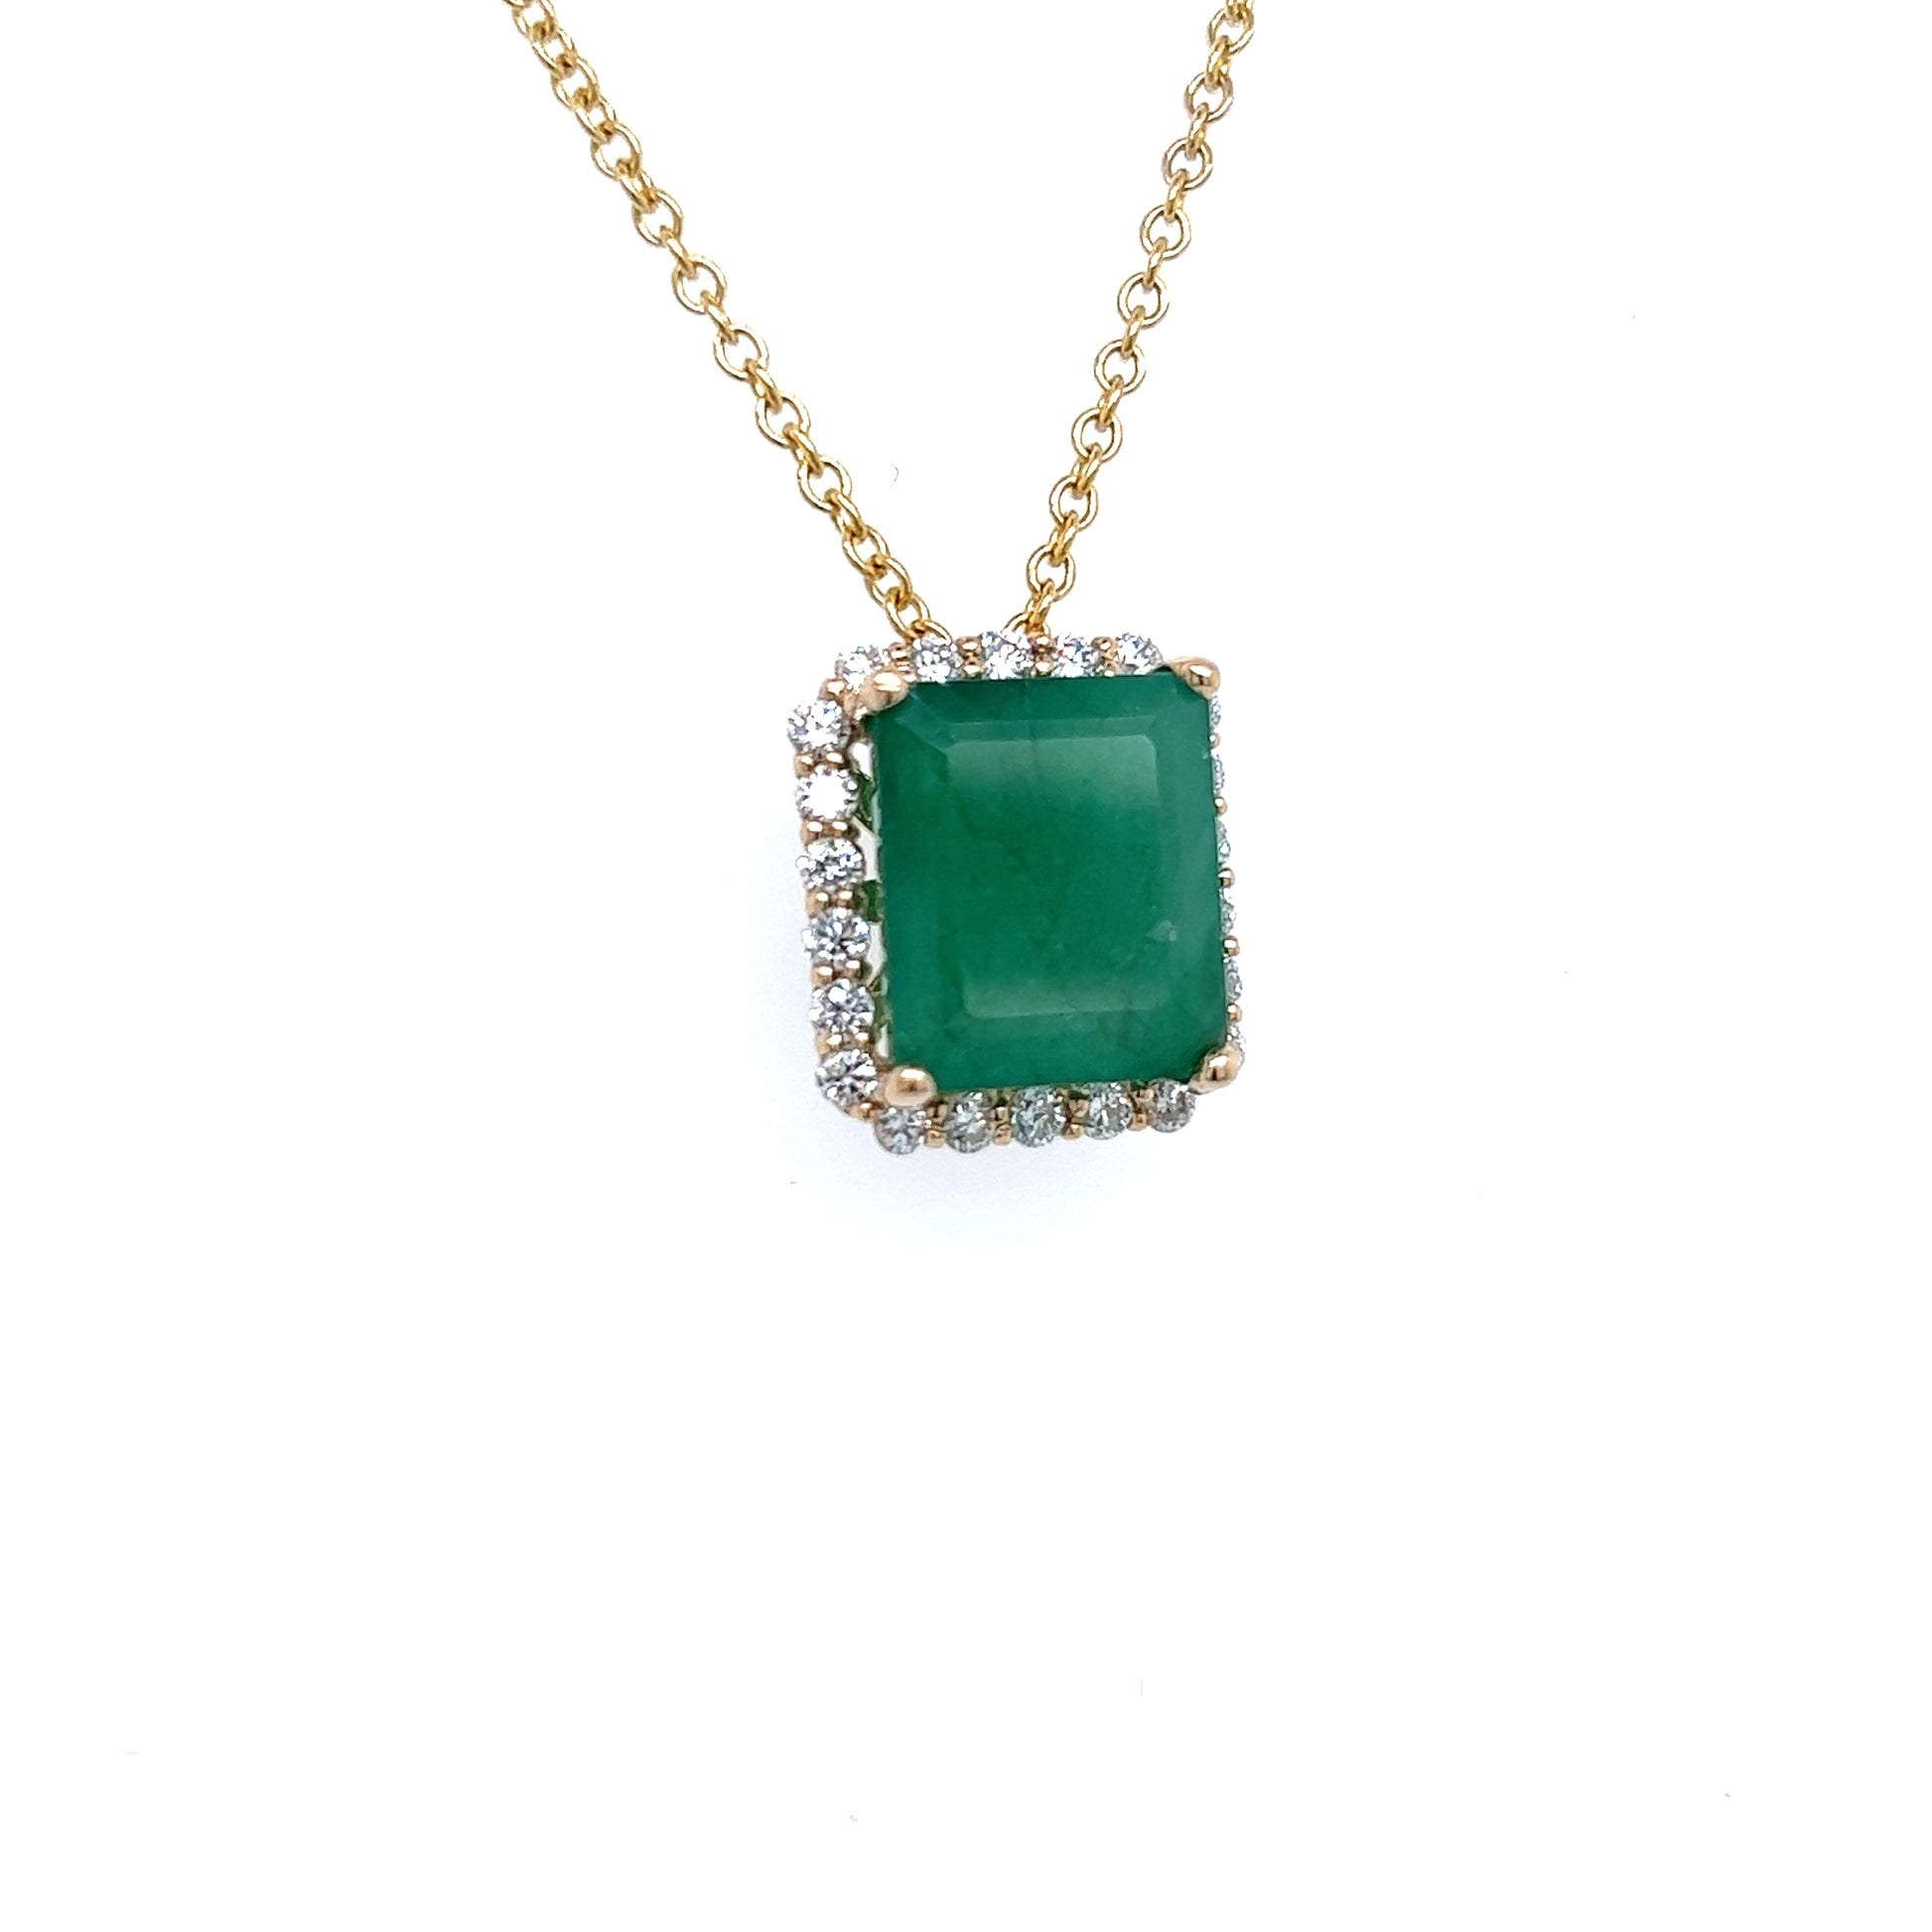 Natural Emerald Diamond Pendant Necklace 17" 14k Yellow Gold 5.05 TCW Certified $6,950 215627 - Certified Fine Jewelry